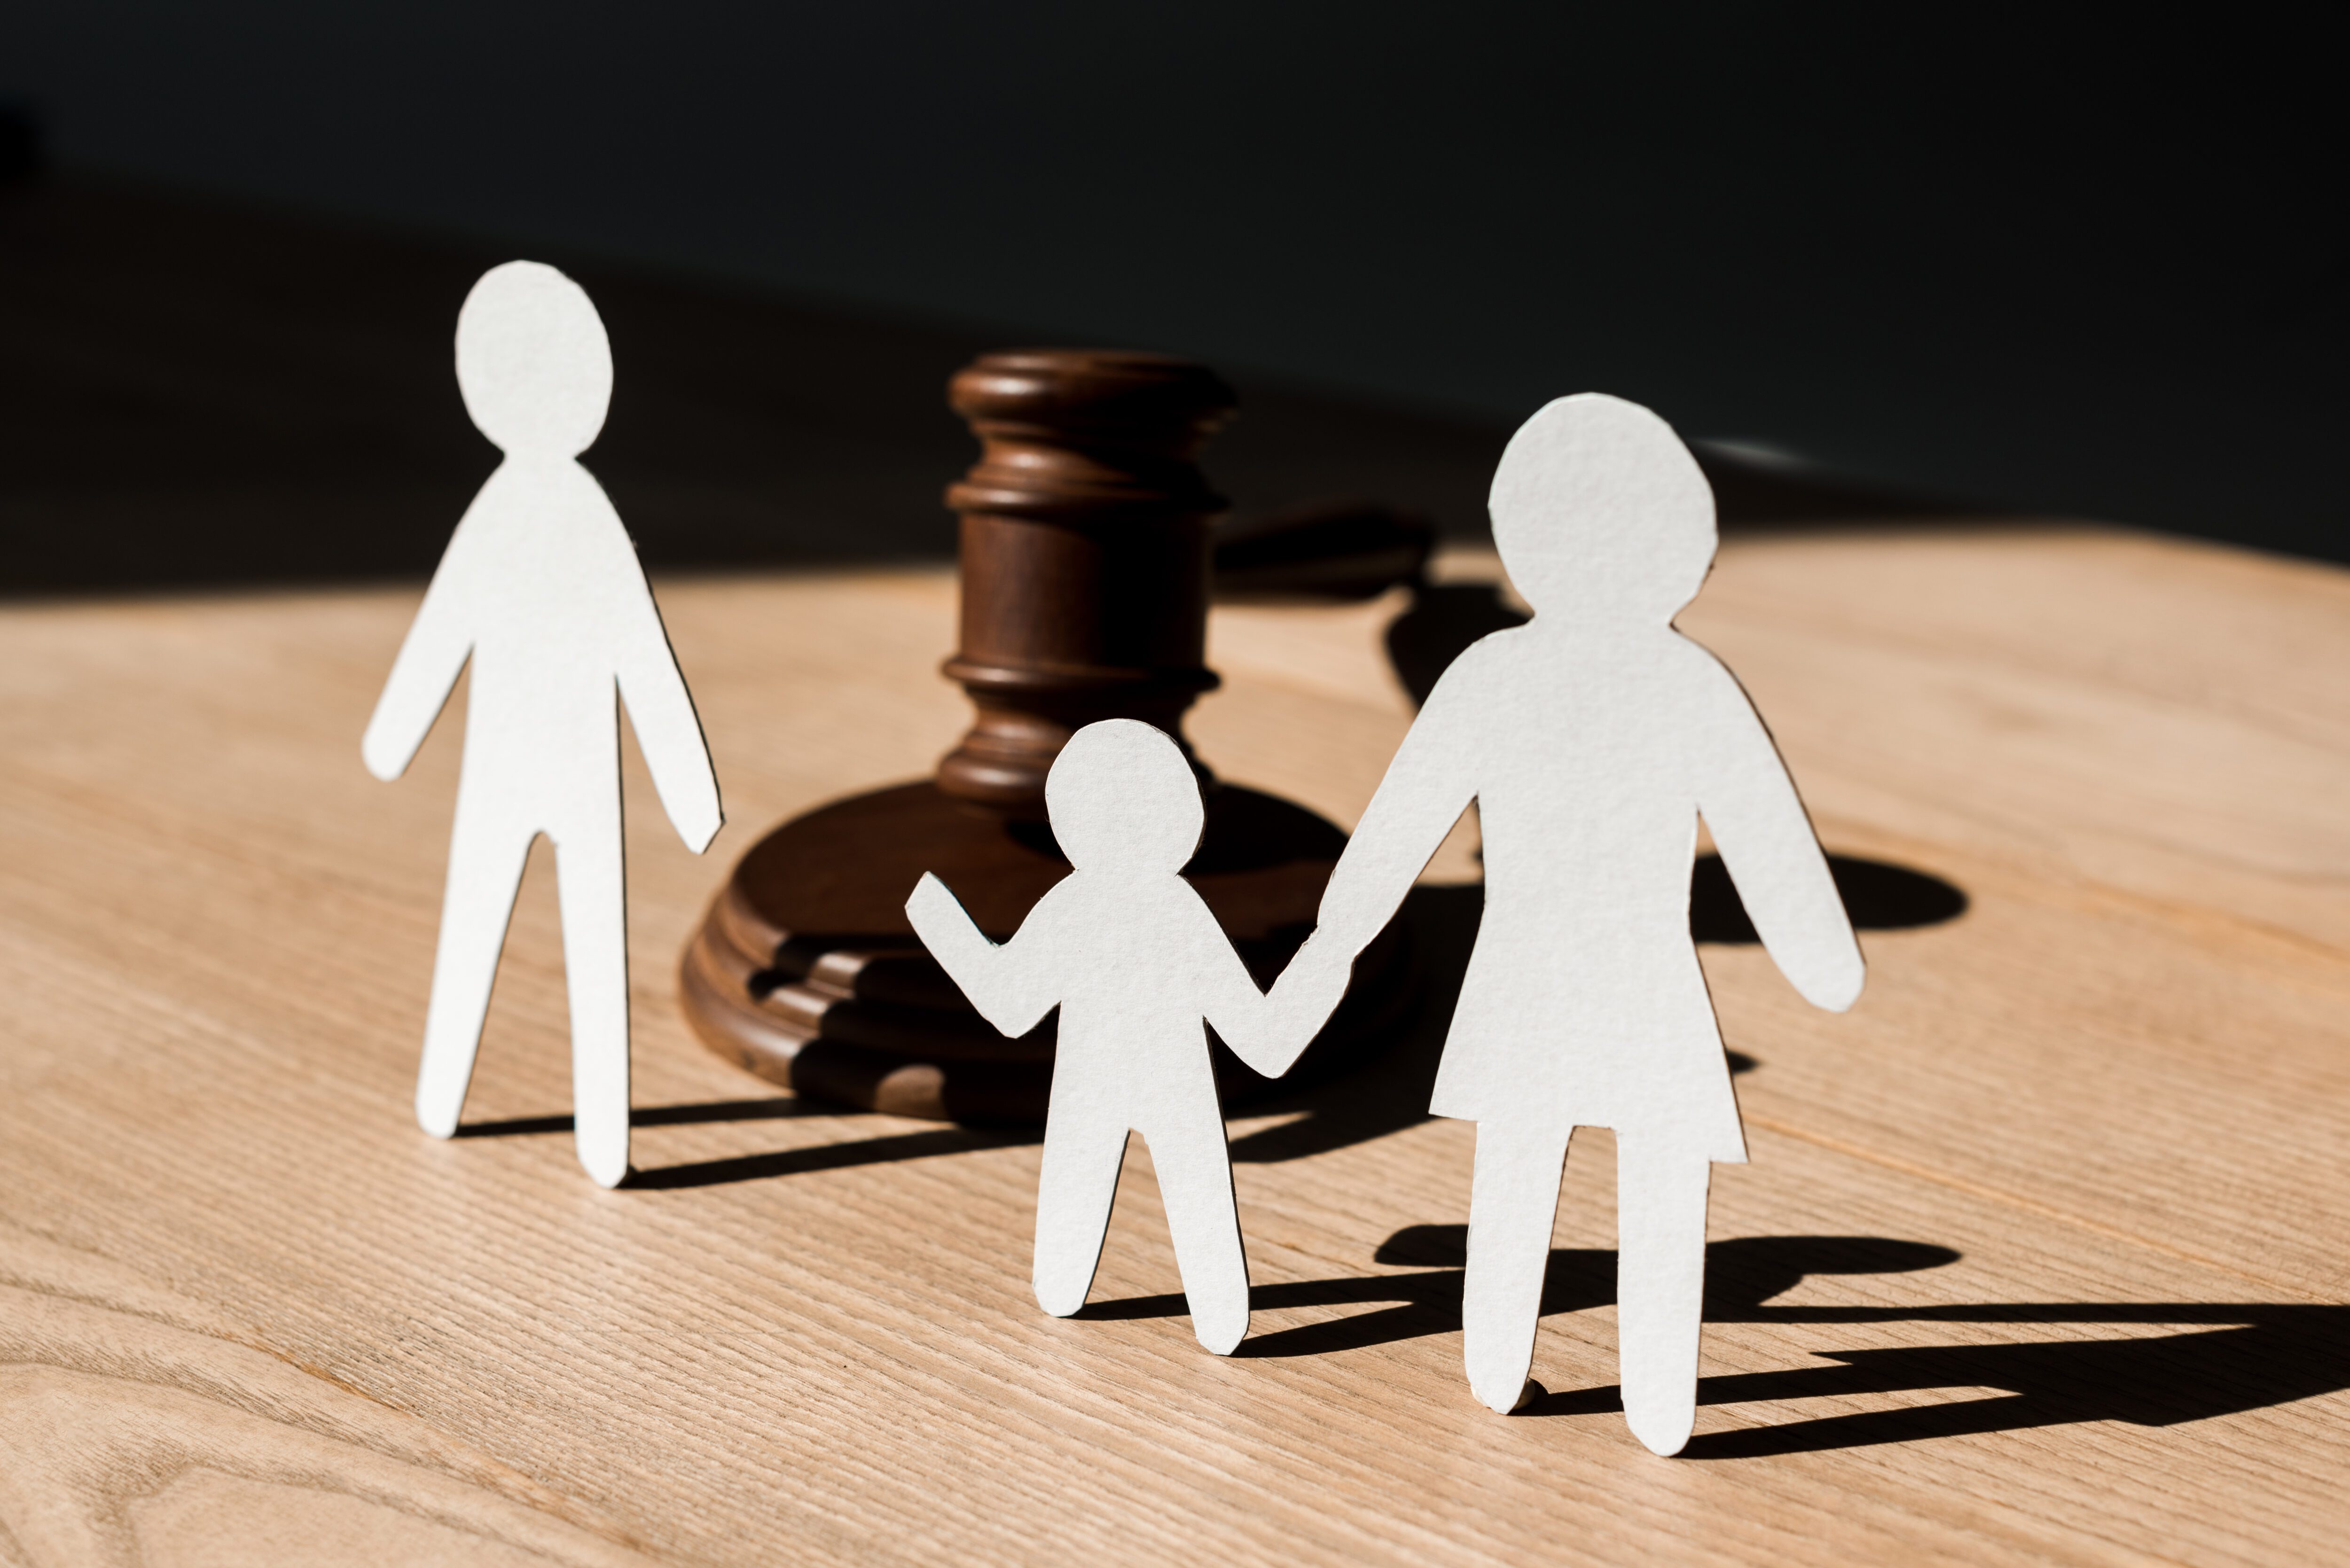 Milazo Law | Franklin Family Law Attorney helping families through divorce